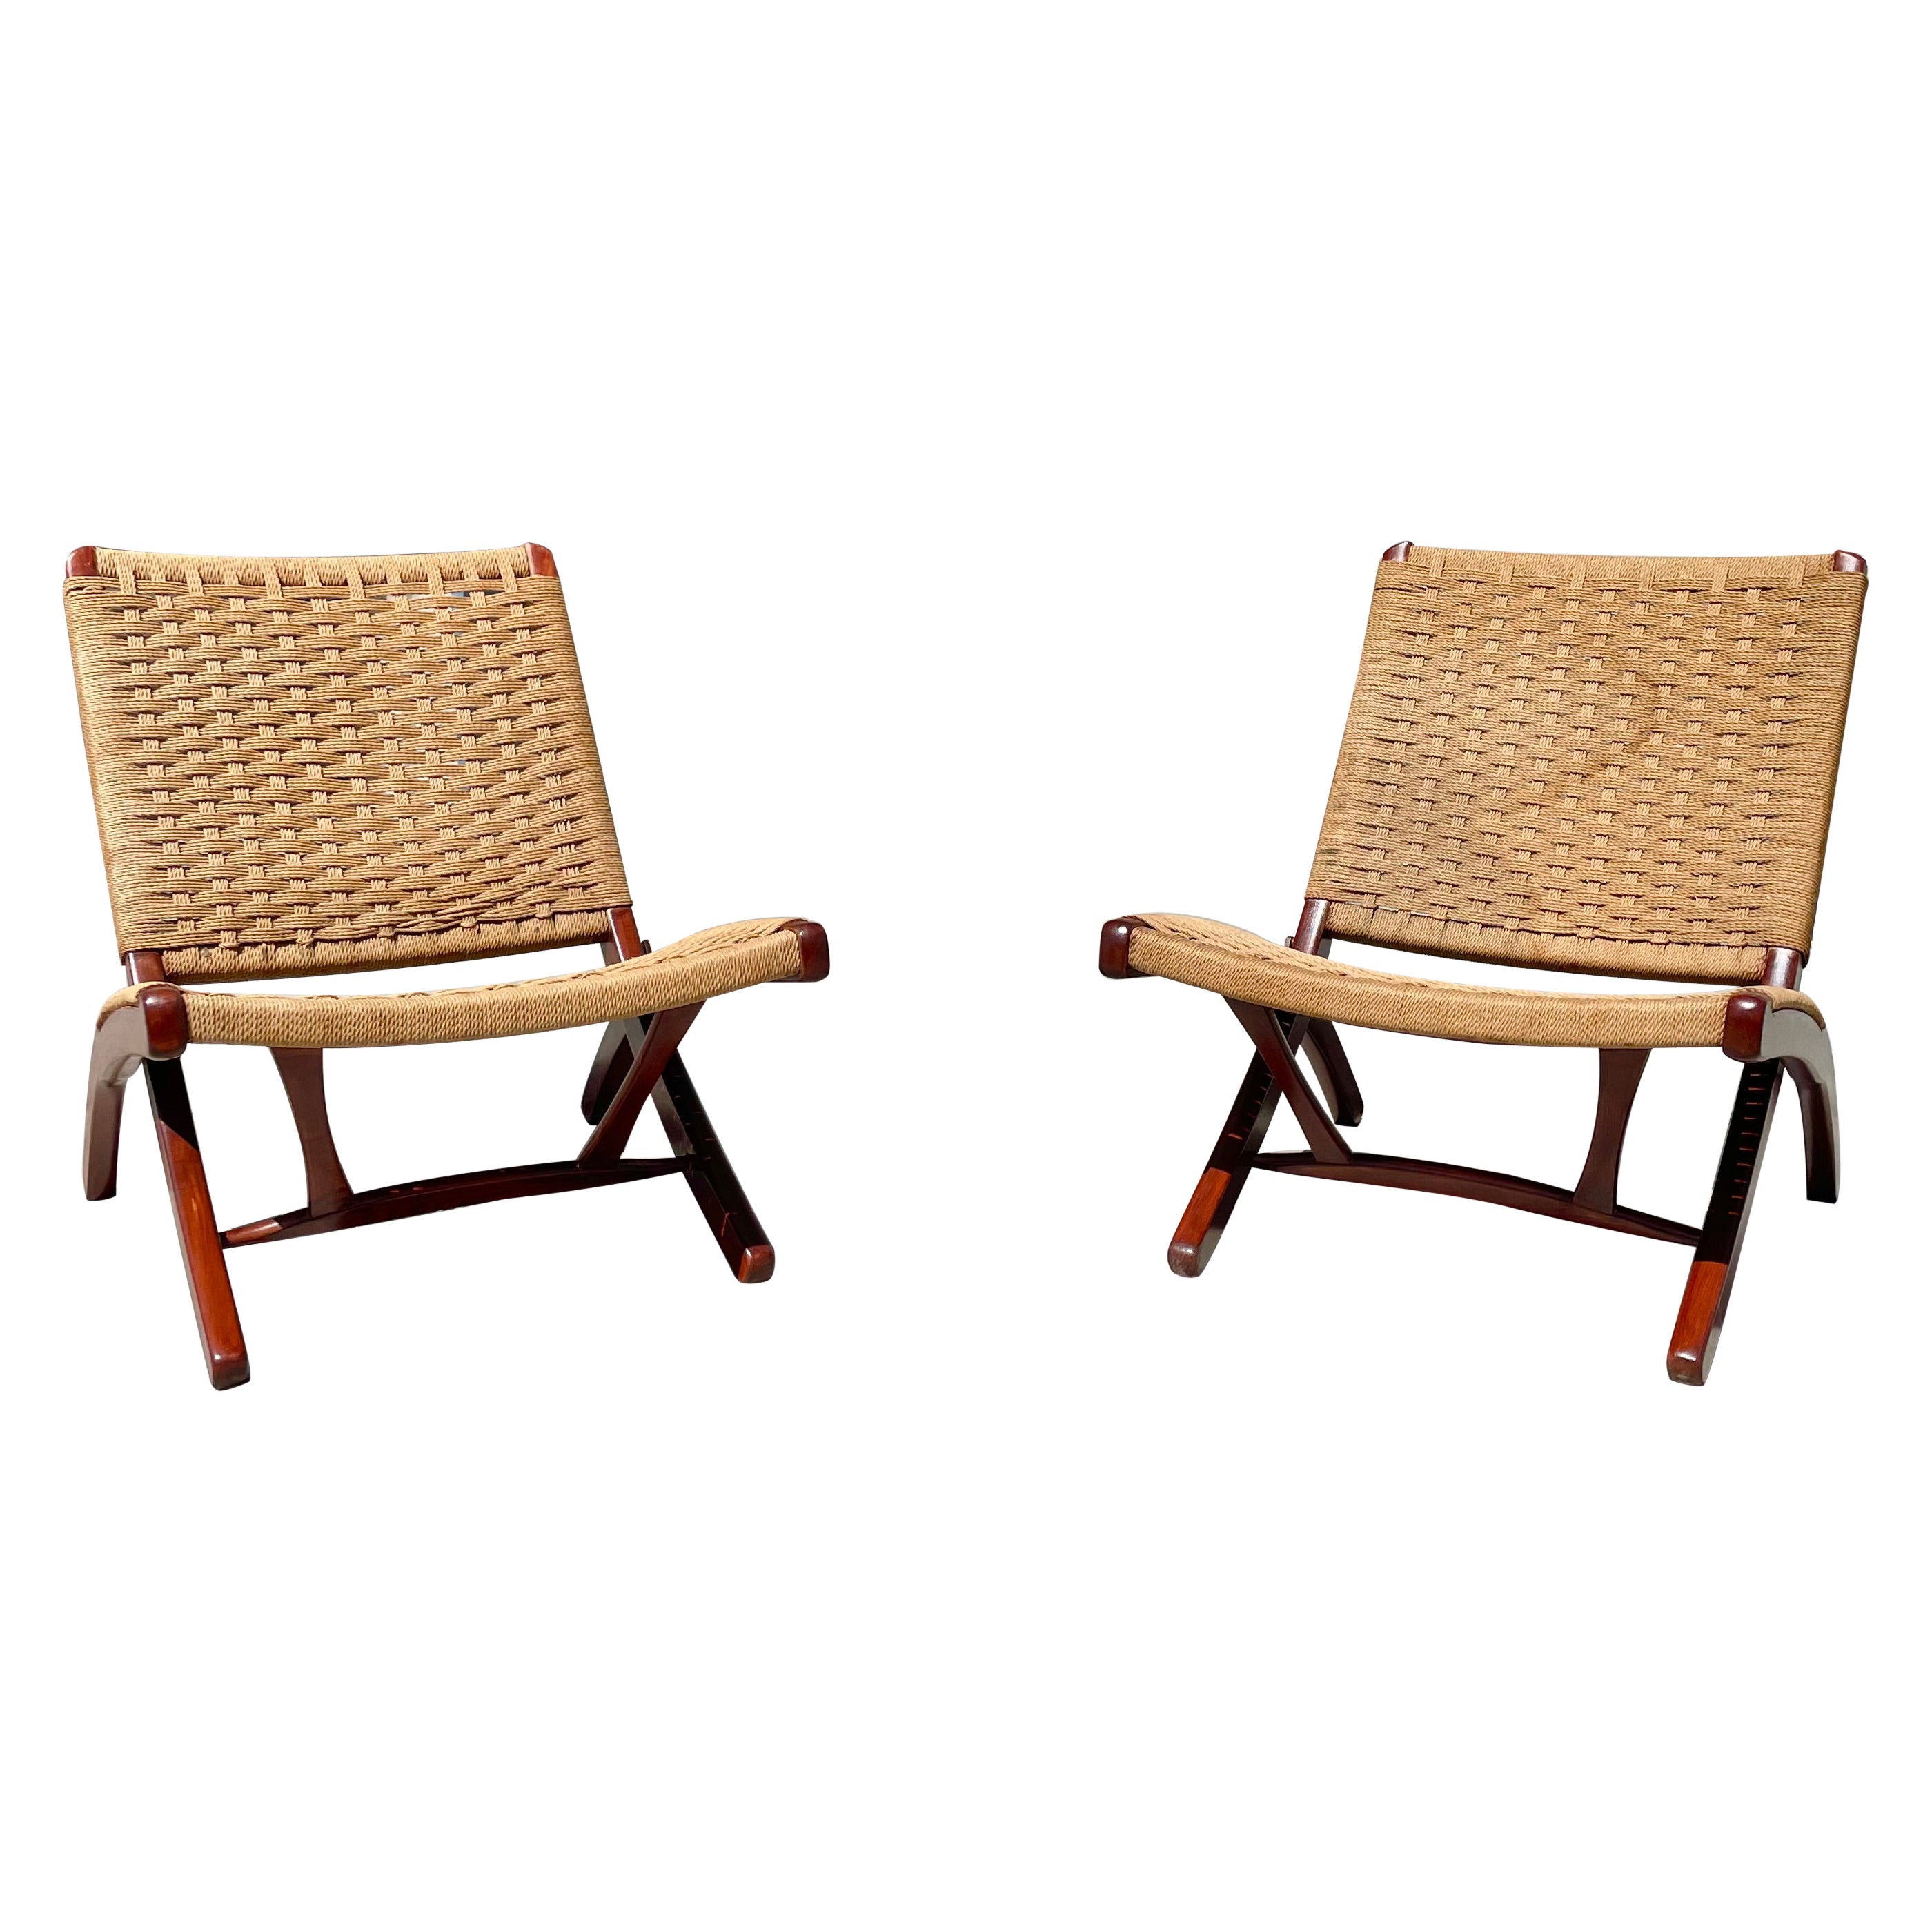 1960s Vintage Folding Rope Lounge Chairs Styled After Hans Wegner